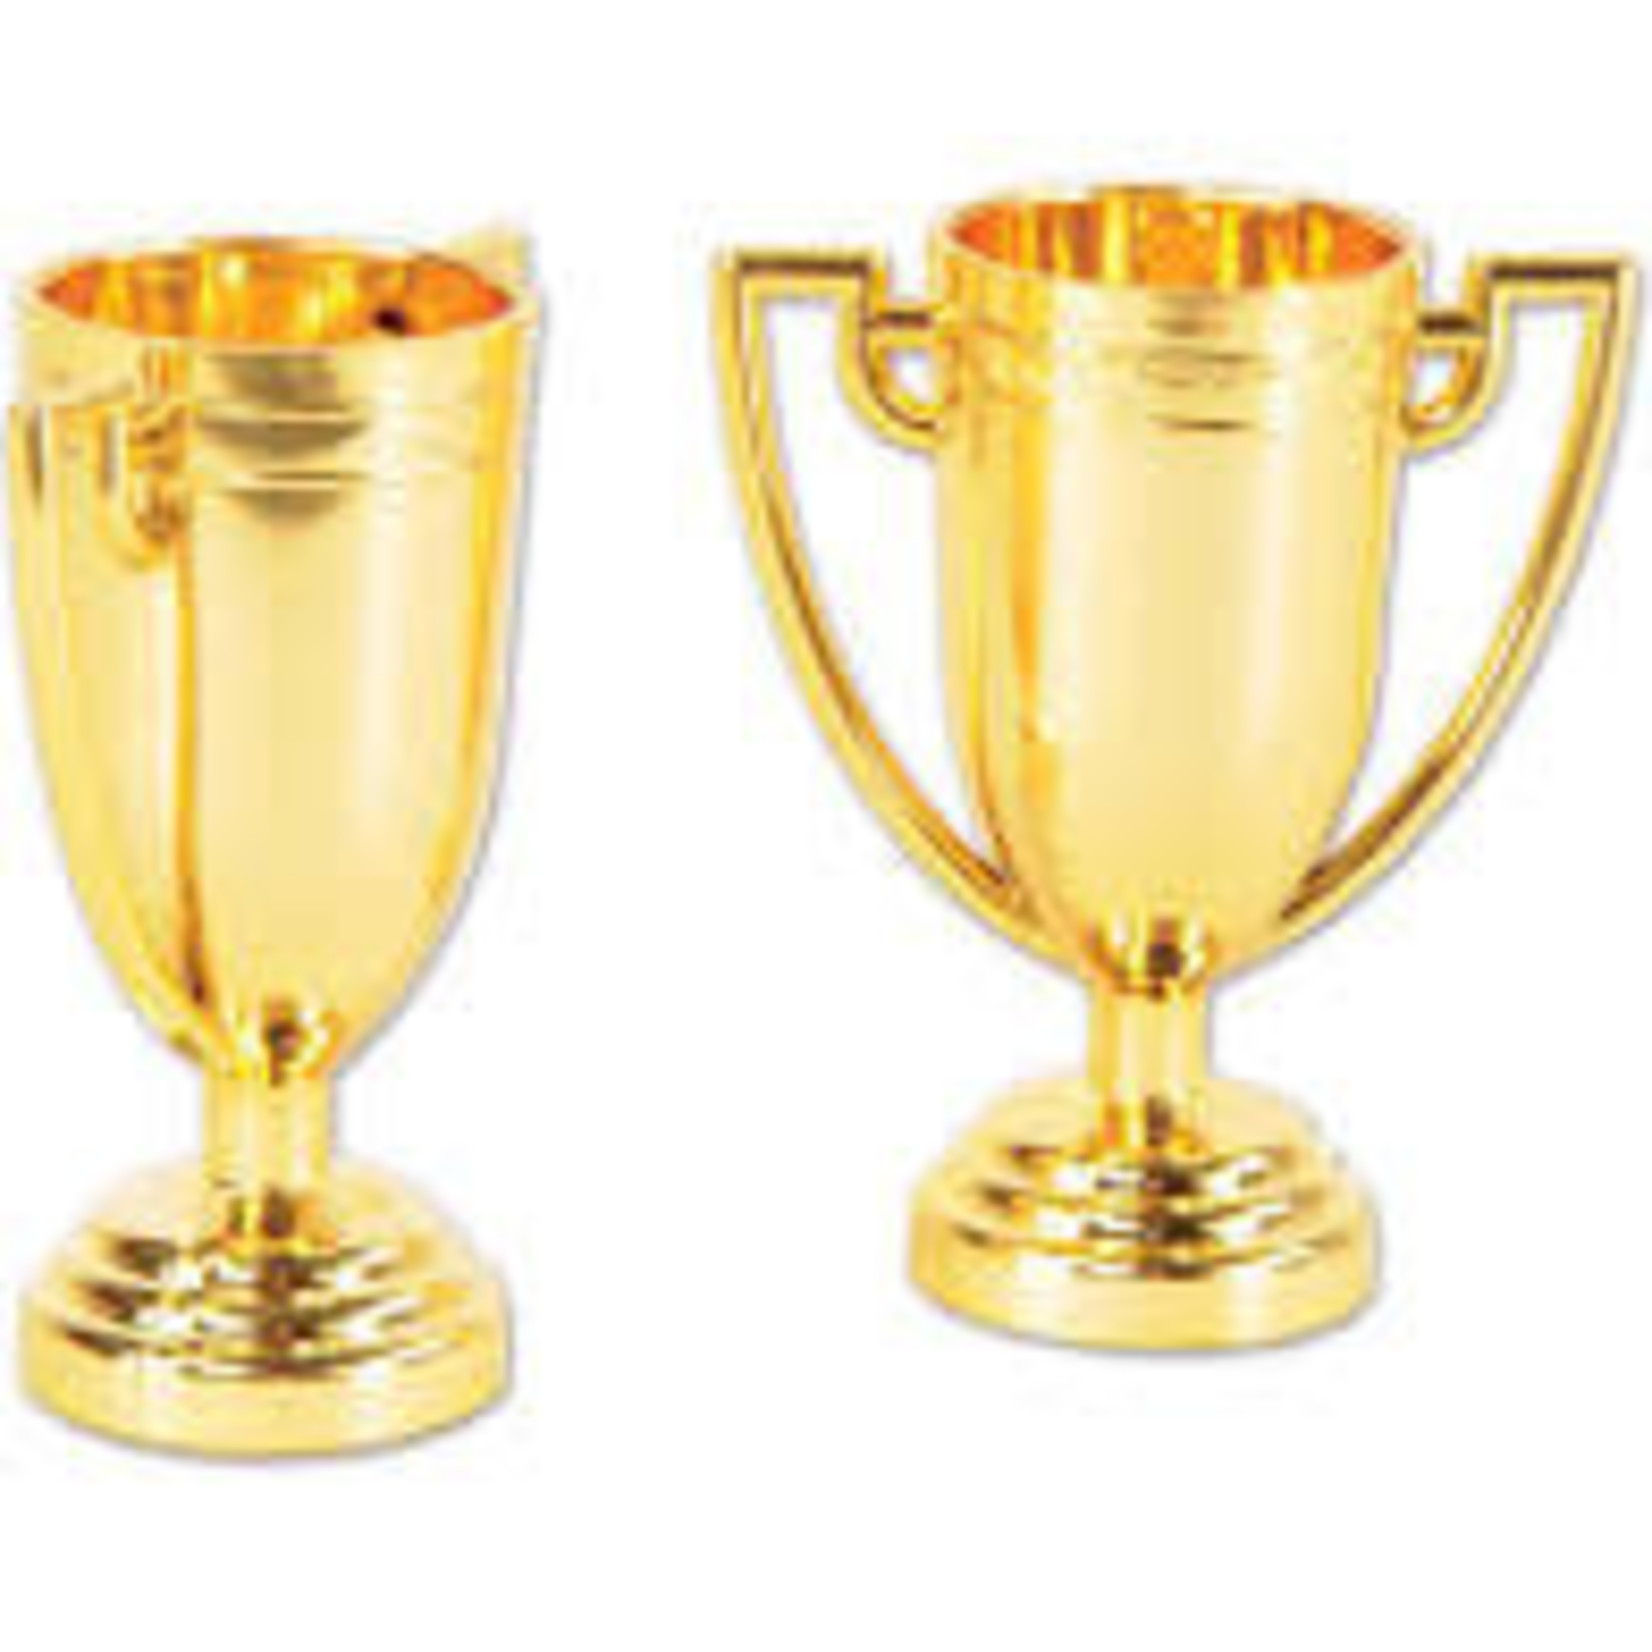 Beistle 2.75" Trophy Cups - 8ct.